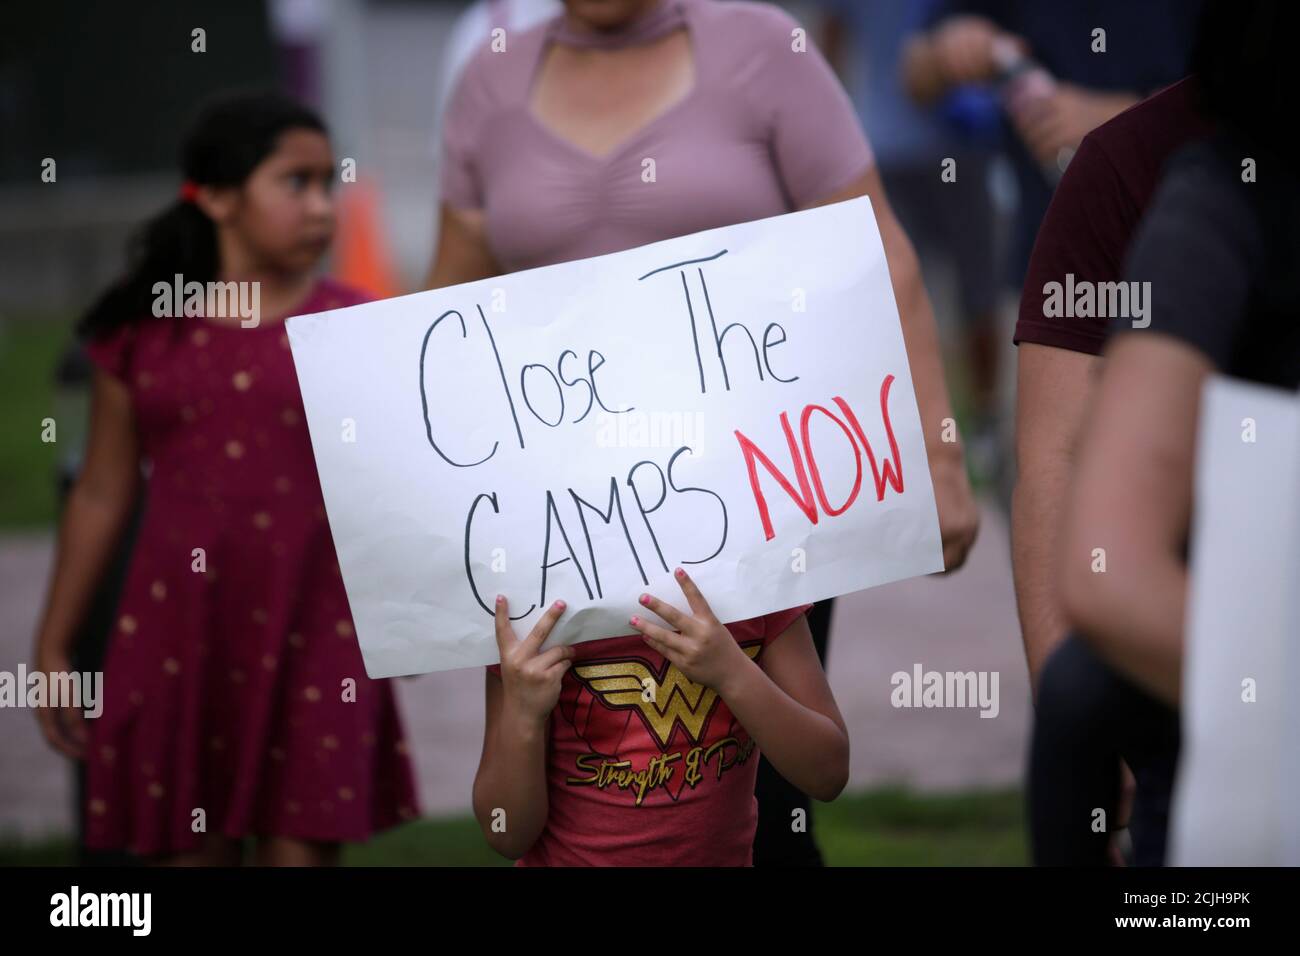 A child holds a sign during an immigration rights rally at Cleveland Square Park in El Paso, Texas, U.S. July 12, 2019. REUTERS/Daniel Becerril Stock Photo